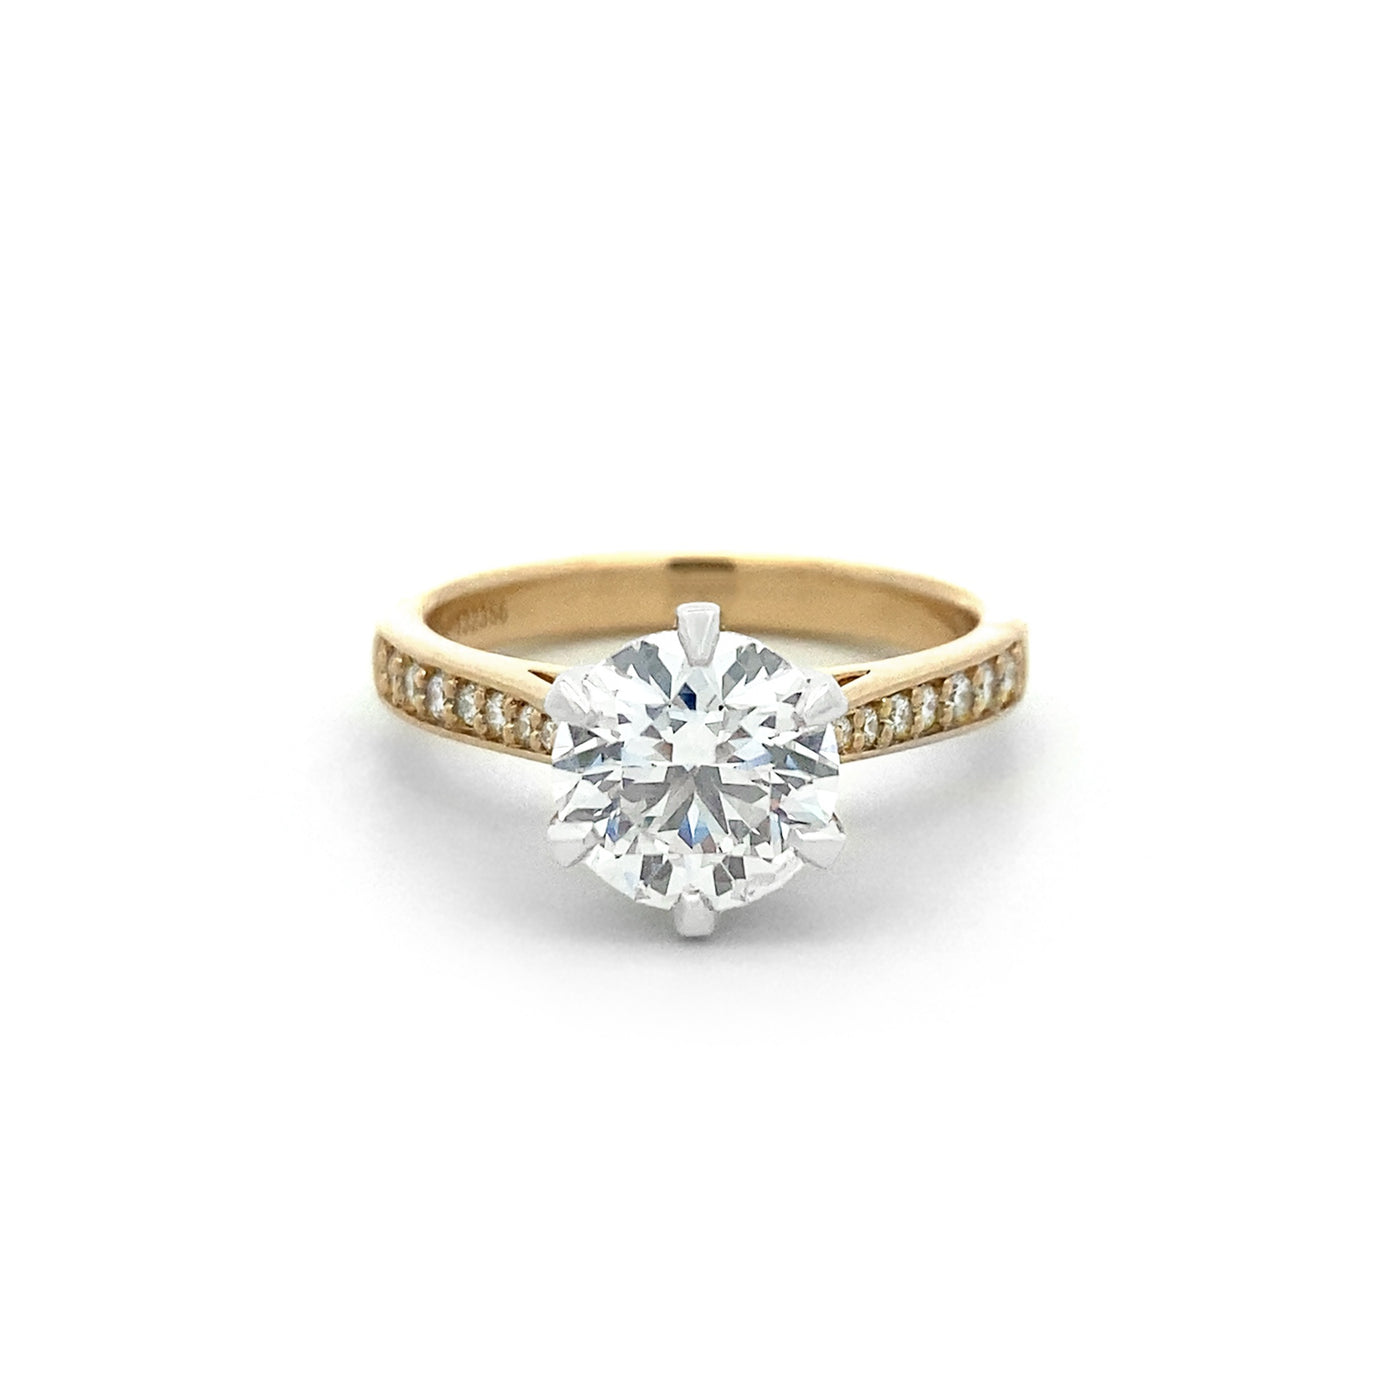 Brilliant Cut Diamond Solitaire Ring in Yellow Gold | 1.85ct I SI2